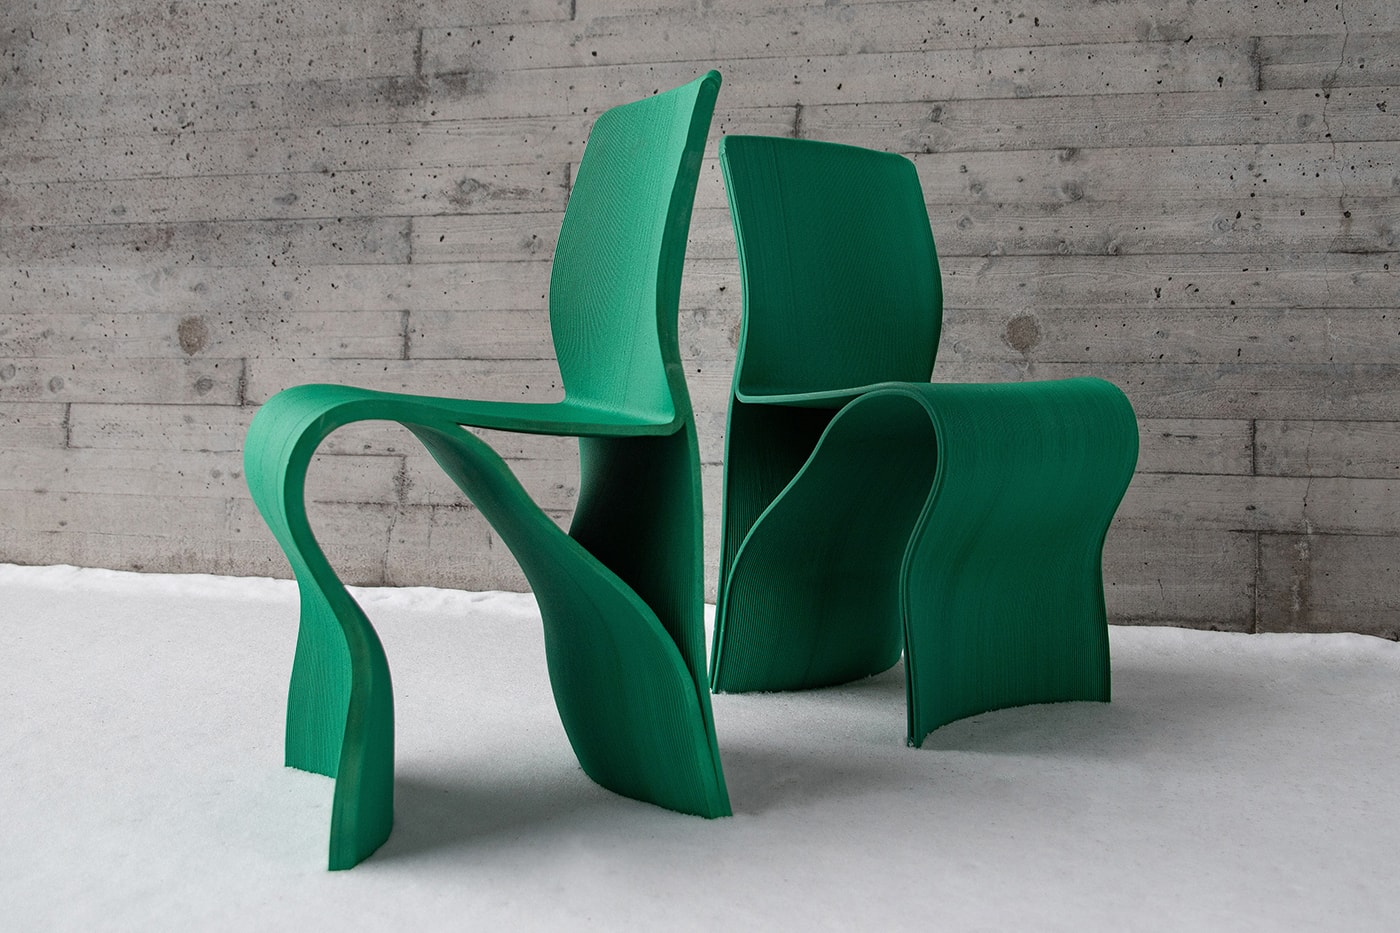 Discarded Fishing Nets Were Used to Create This 3D-Printed Chair by Interesting Times Gang